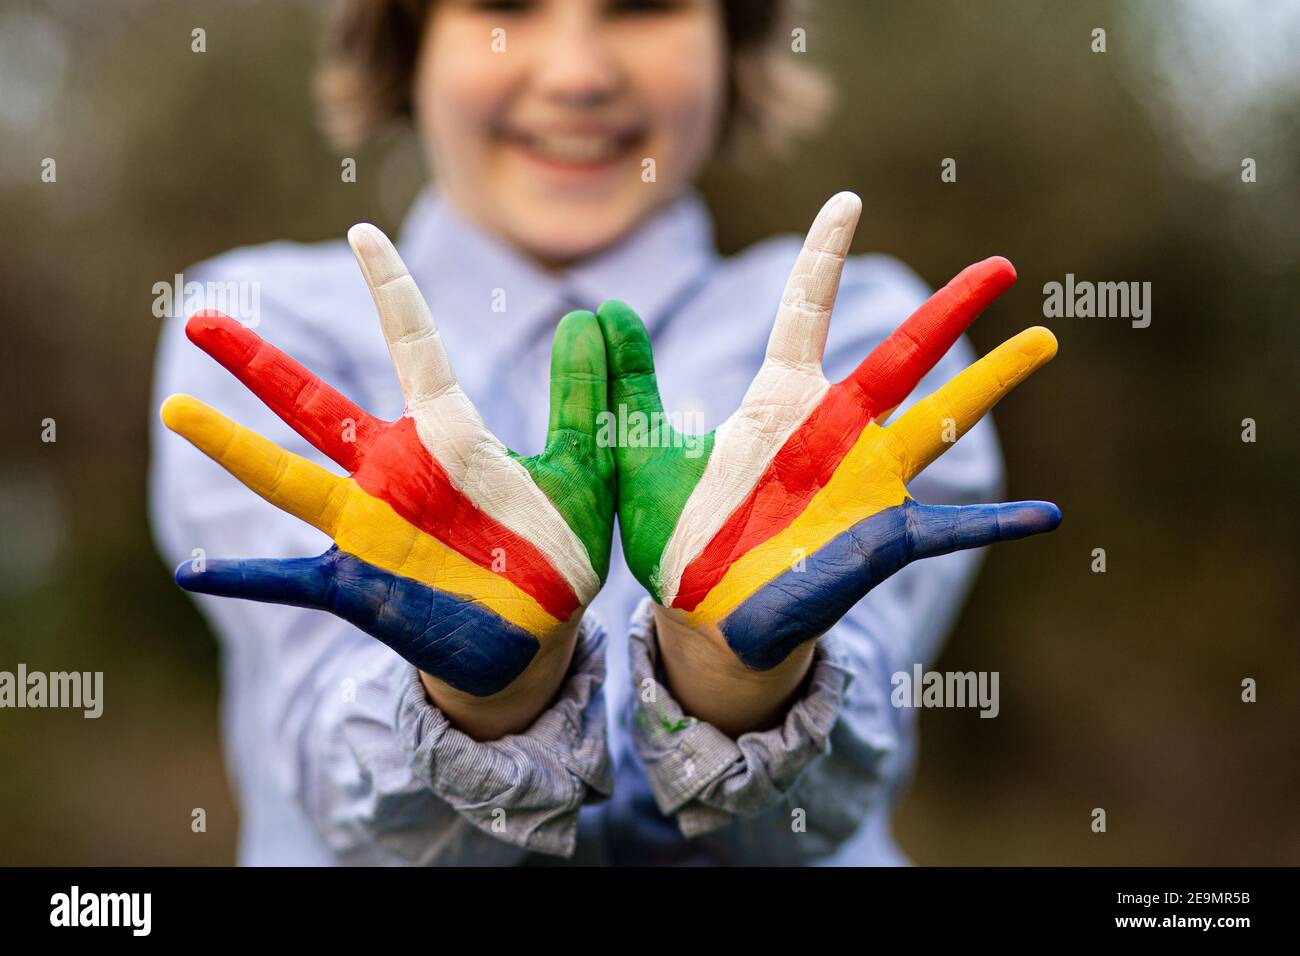 Freedom Seychelles concept. Cute child forming flying bird gesture with hands painted in Seychelles flag colors. Focus on hands Stock Photo